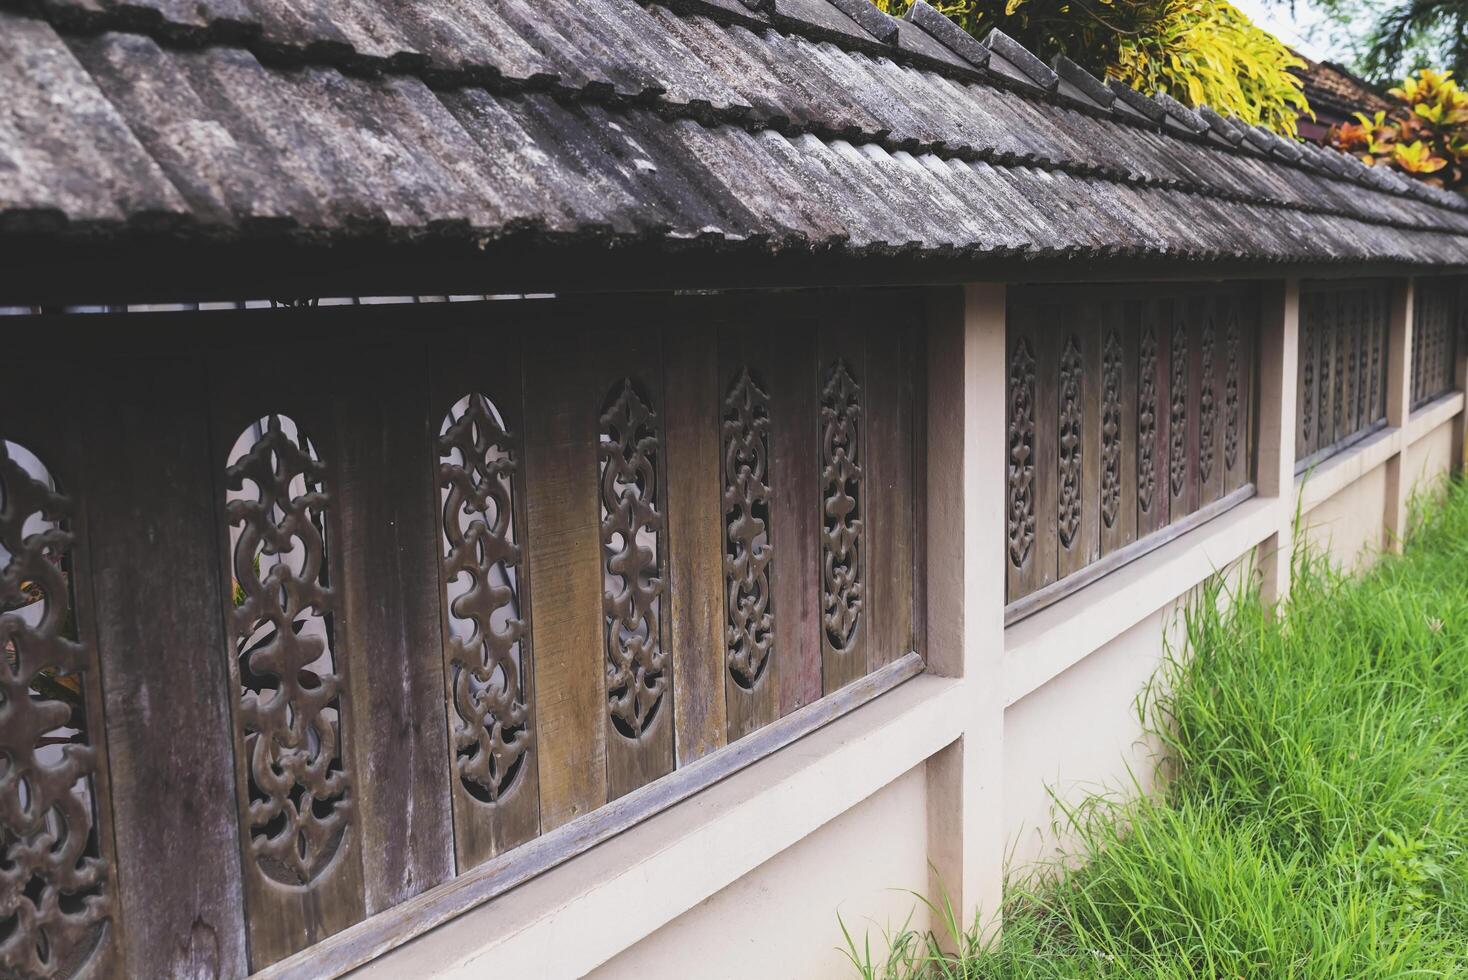 Fence walls with stenciled wood carvings adorn the retro style fence. photo